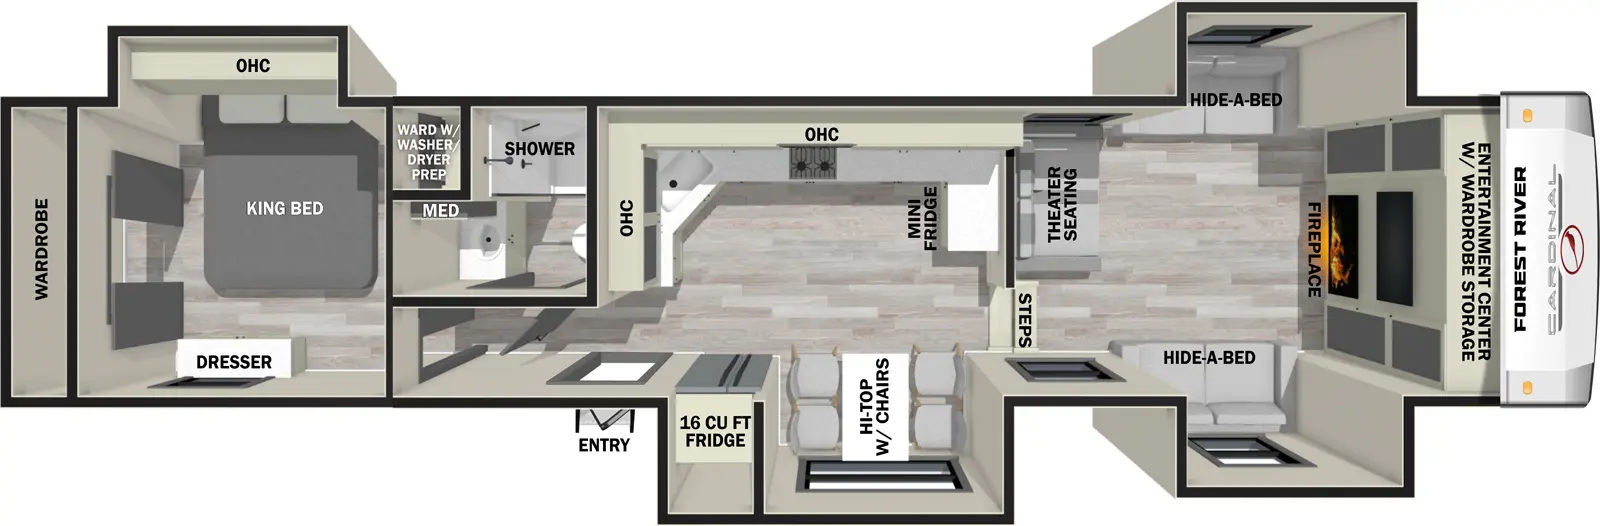 The 35FL has four slideouts and one entry. Interior layout front to back: entertainment center with wardrobe and fireplace, opposing hide-a-bed sofa slideouts, and theater seating across from front entertainment center; steps down to main living area; door side slideout with hi-top with chairs, and refrigerator; kitchen counter with mini fridge wraps from inner wall to off-door side with cooktop and overhead cabinets, and continues to wrap to other inner wall with sink; door side entry; off-door side full bathroom with medicine cabinet; rear bedroom with off-door side closet with washer/dryer prep, and king bed slideout, rear wardrobe, and door side dresser.